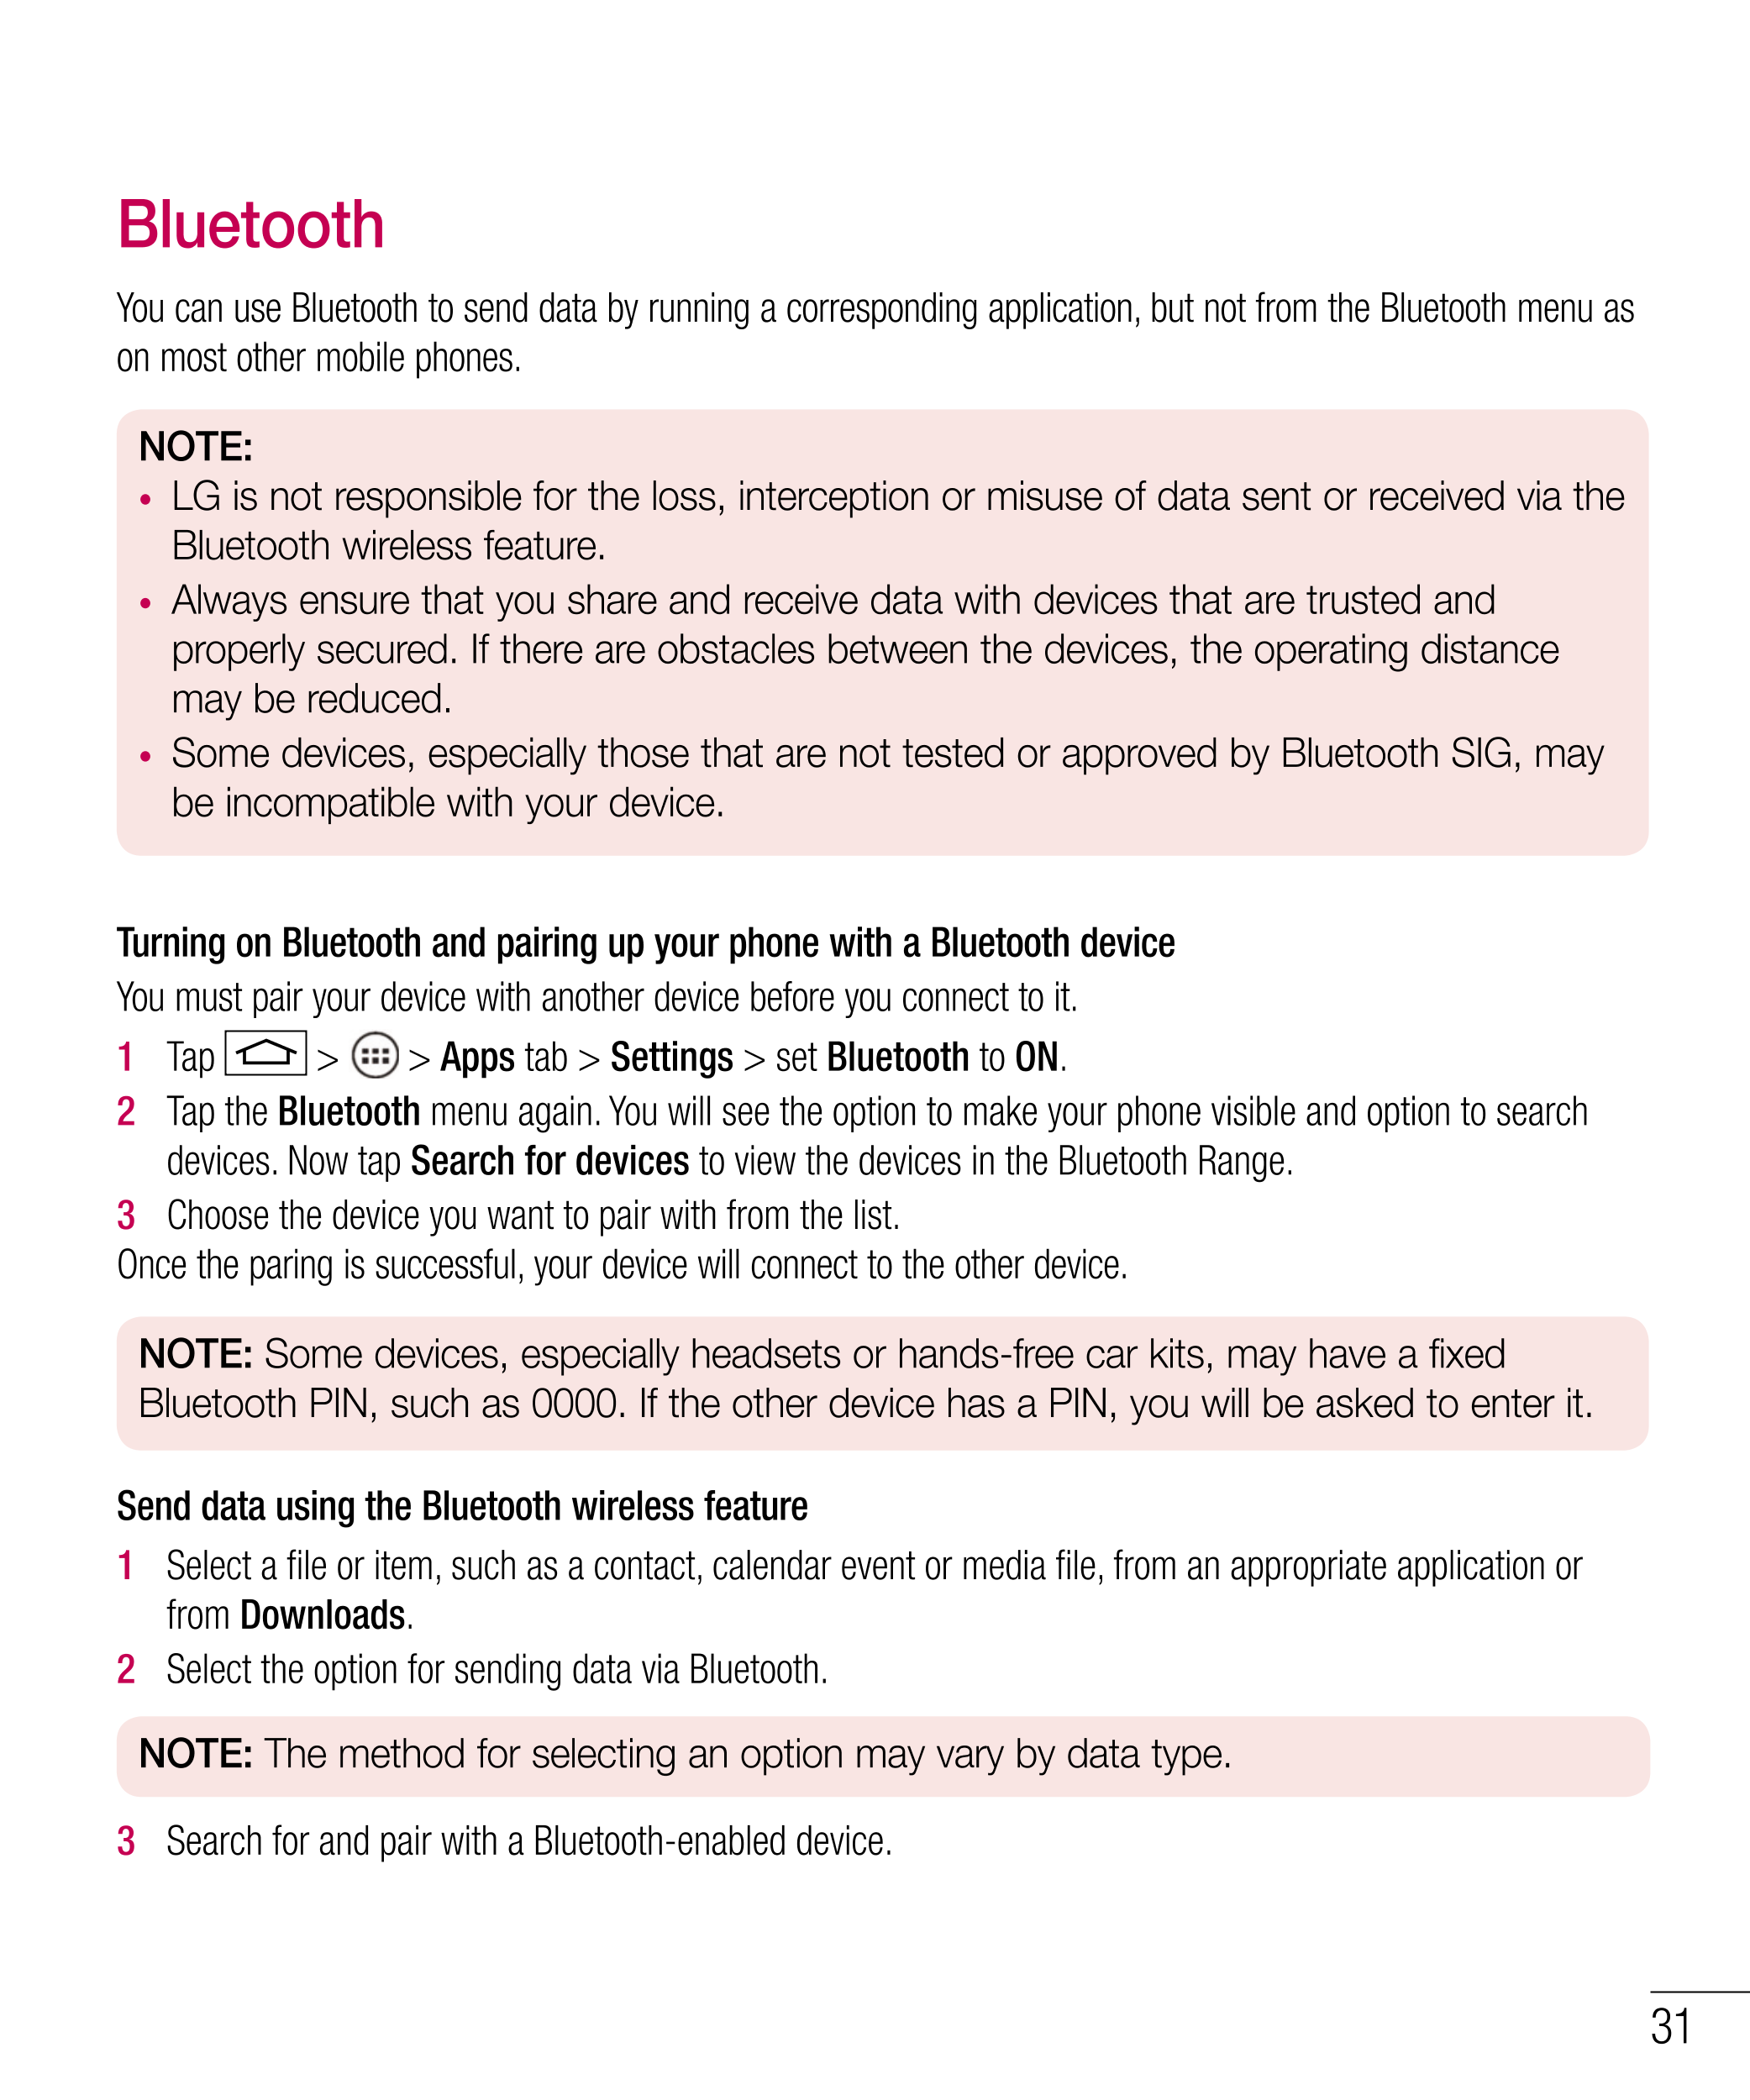 Bluetooth
You can use Bluetooth to send data by running a corresponding application, but not from the Bluetooth menu as 
on most